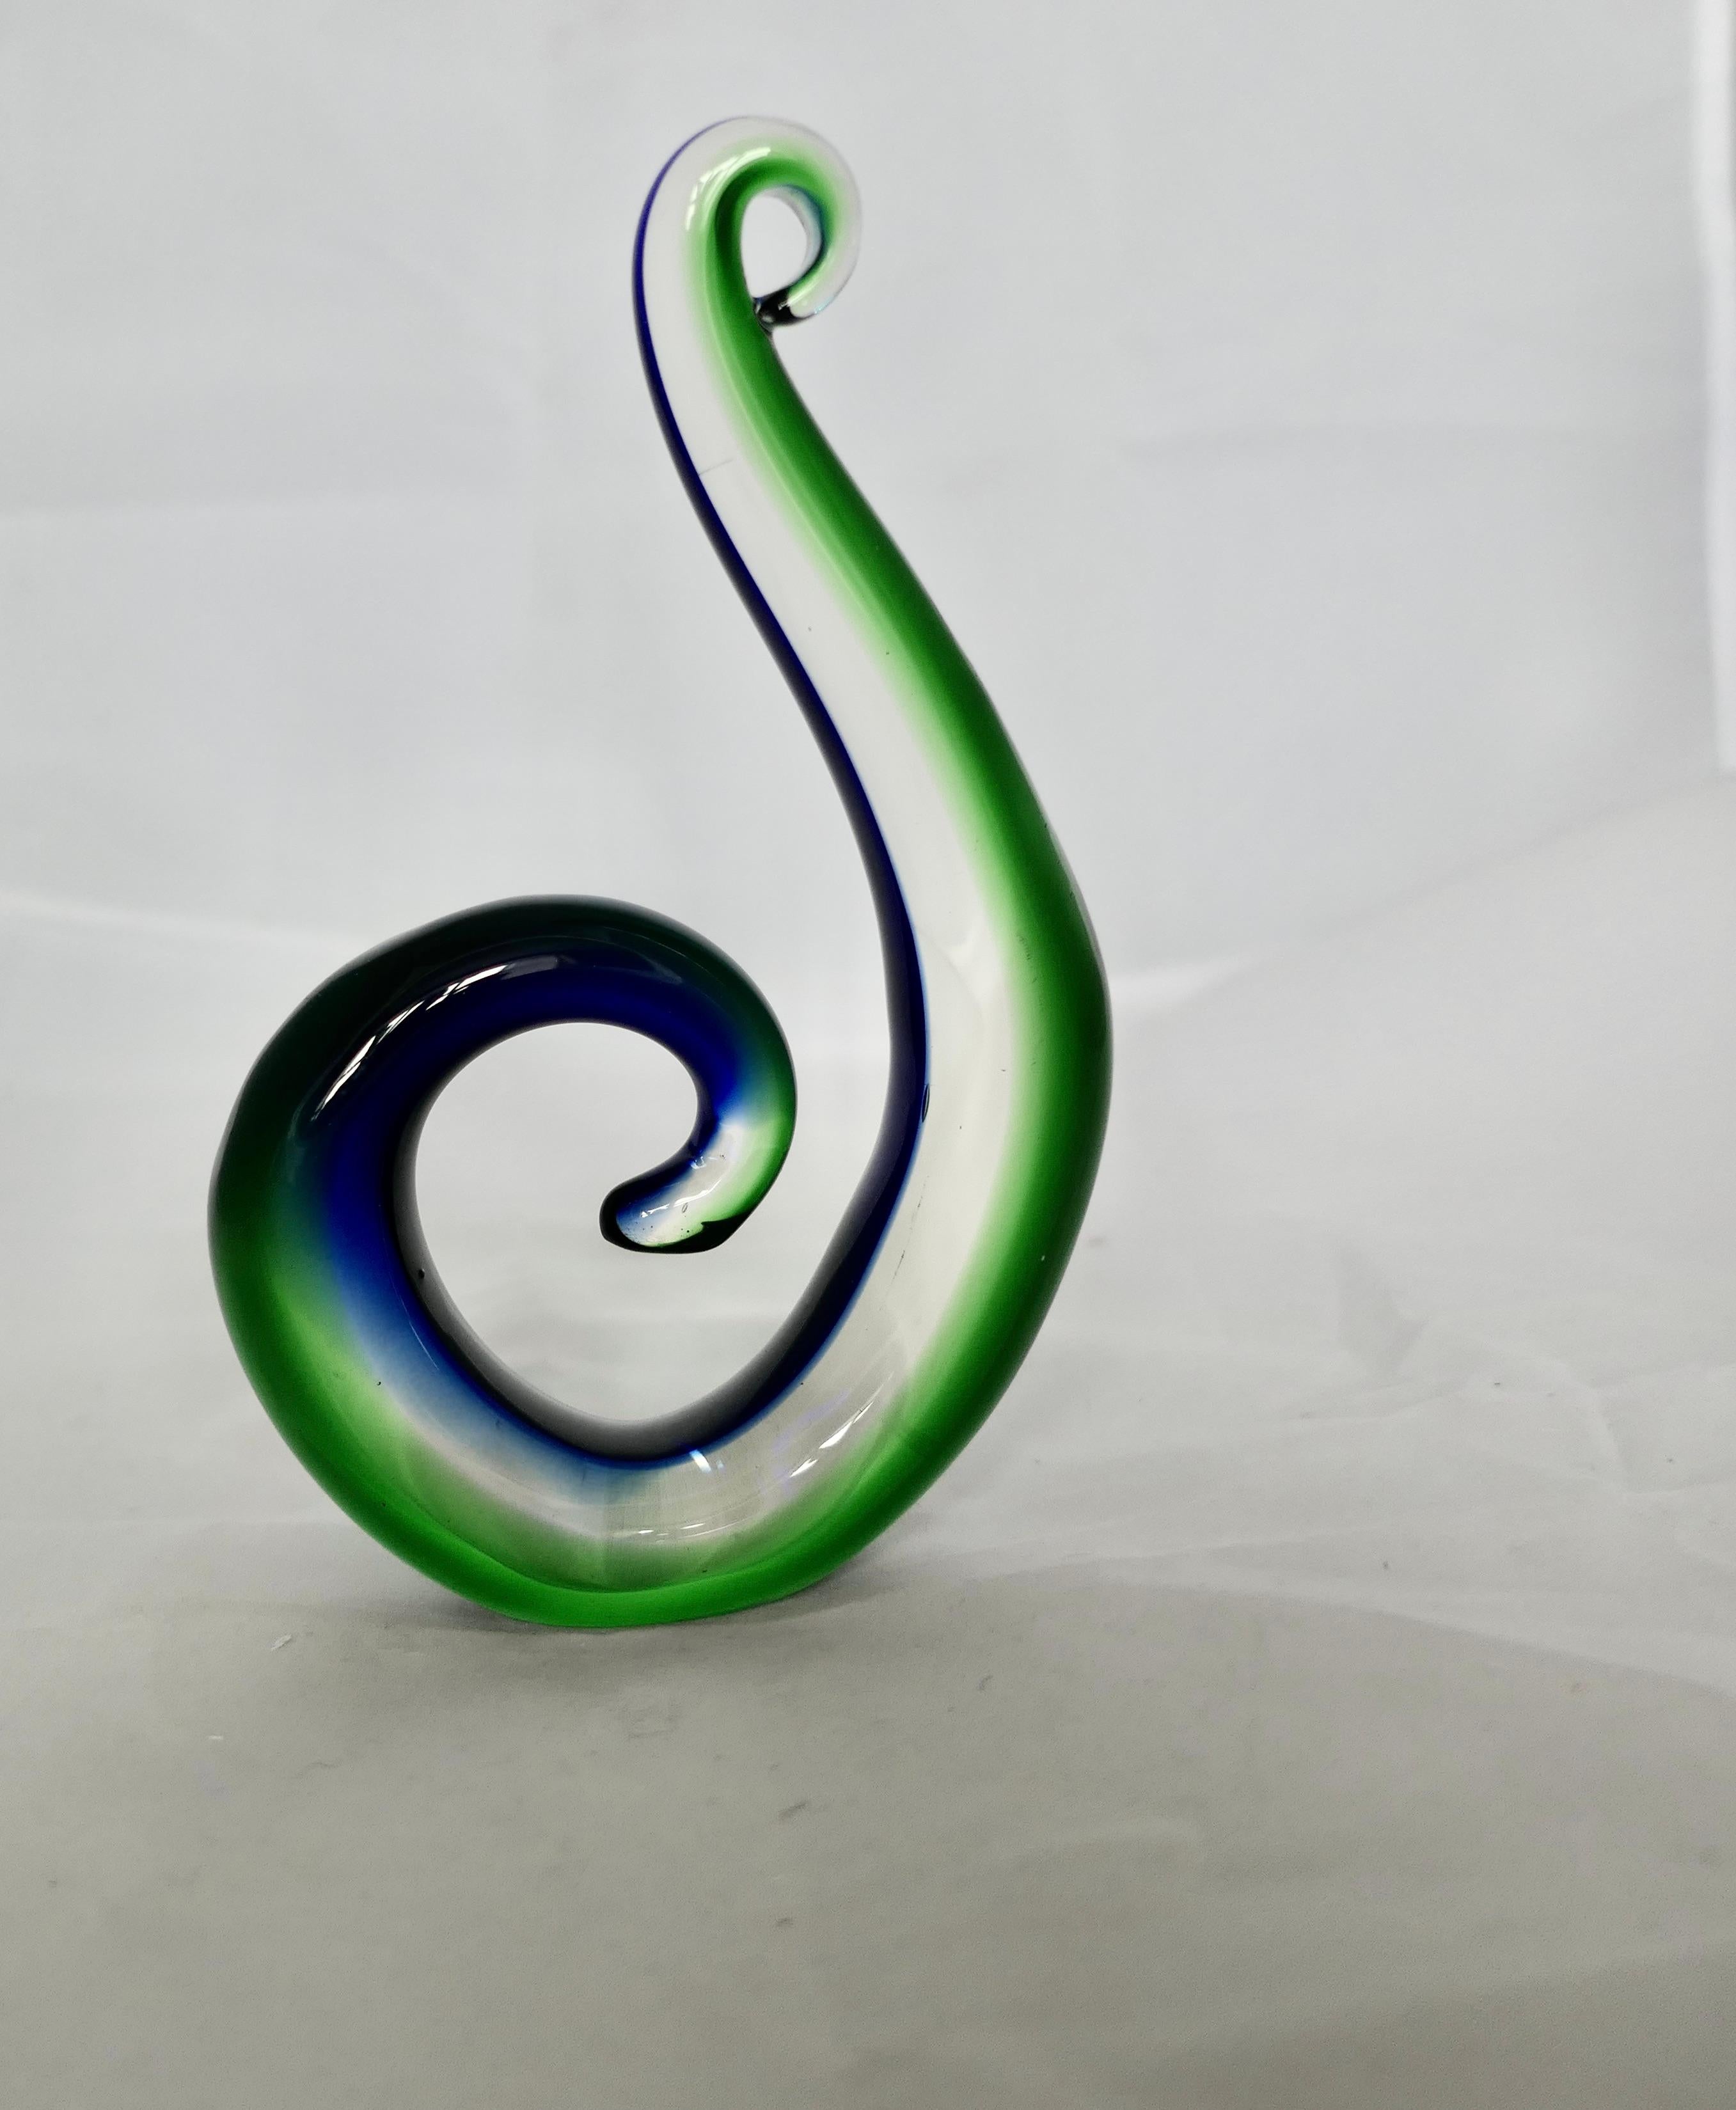 Vintage Murano Hand Crafted Green and Blue Koru

Representing a Fern Frond uncurling the Koru is a representation of the New beginning
The piece is 7” tall, 4.5” wide and 1.5” deep
FB220